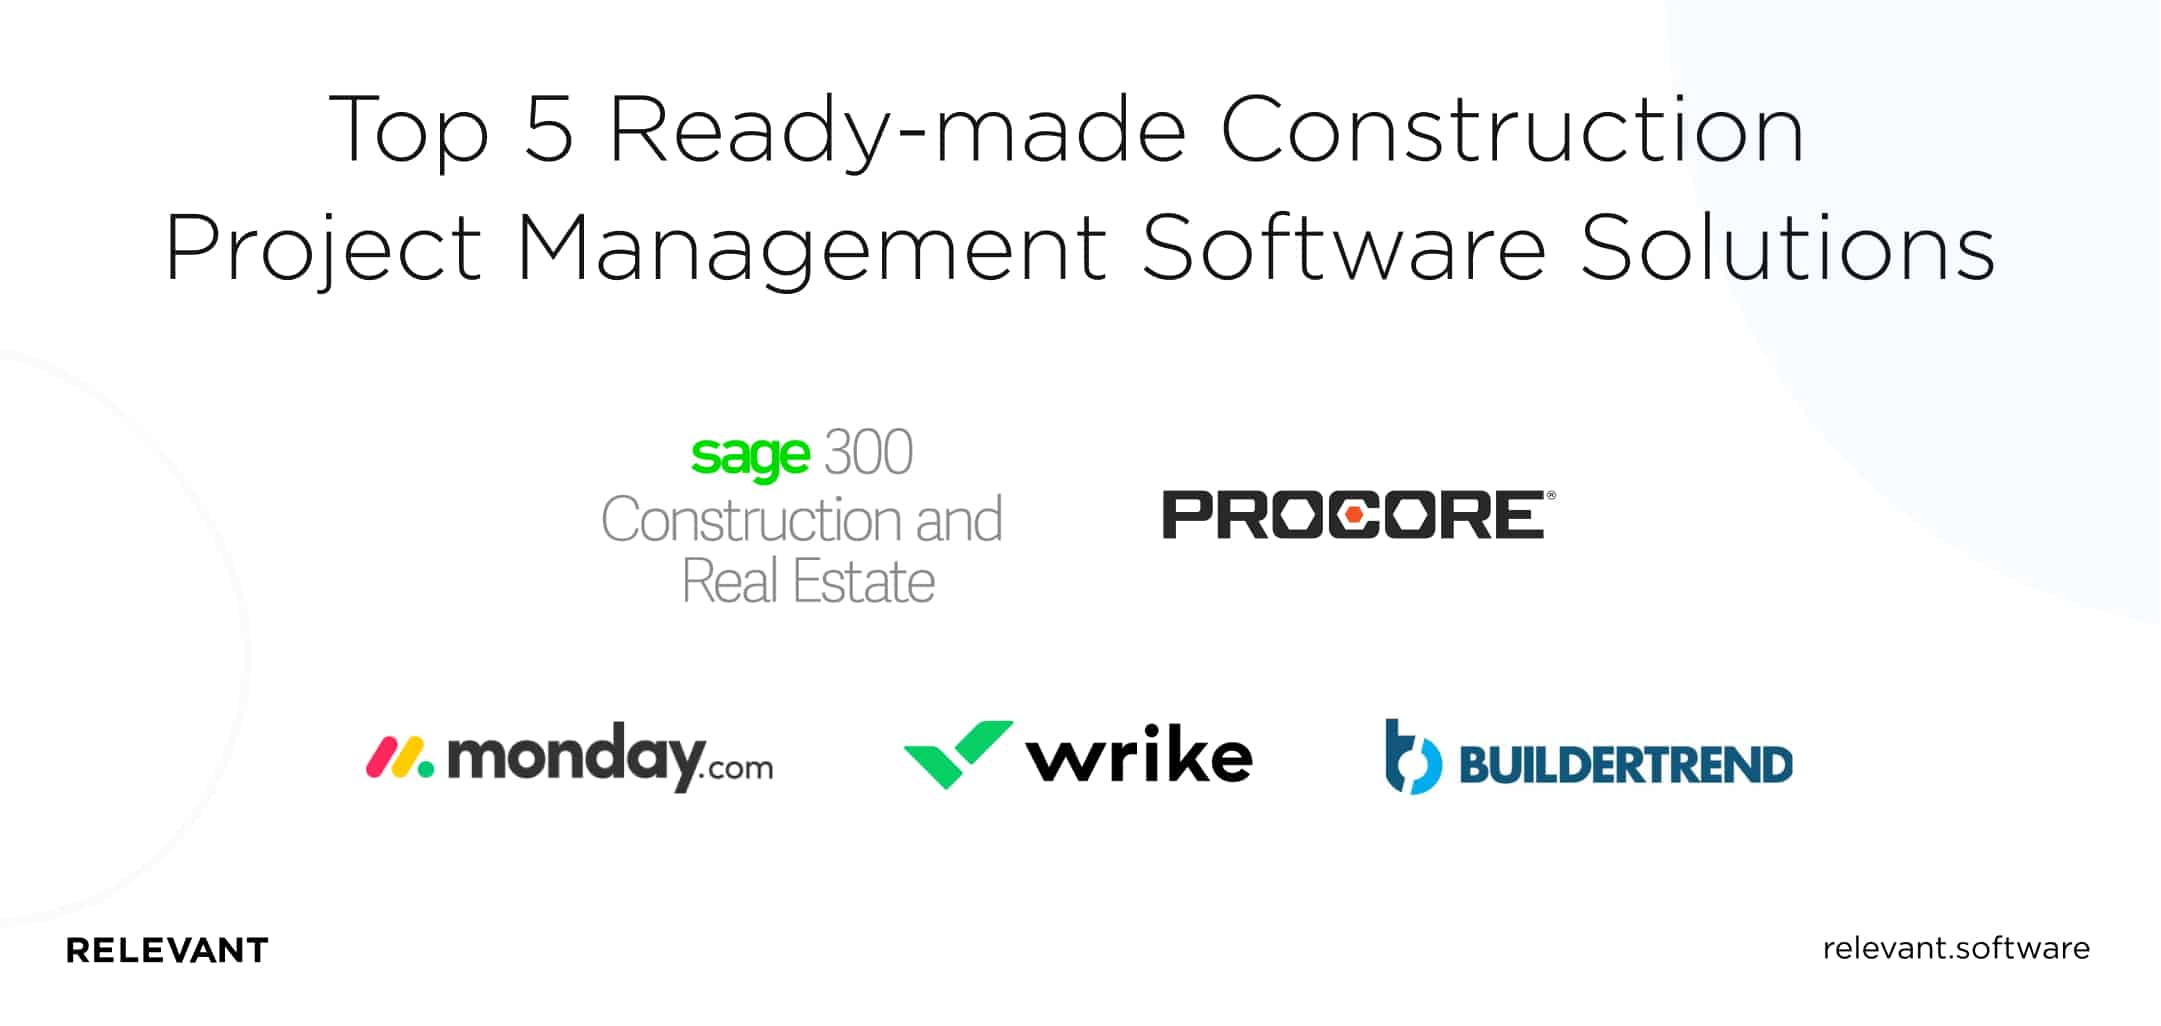 Top 5 Ready-made Construction Project Management Software Solutions
